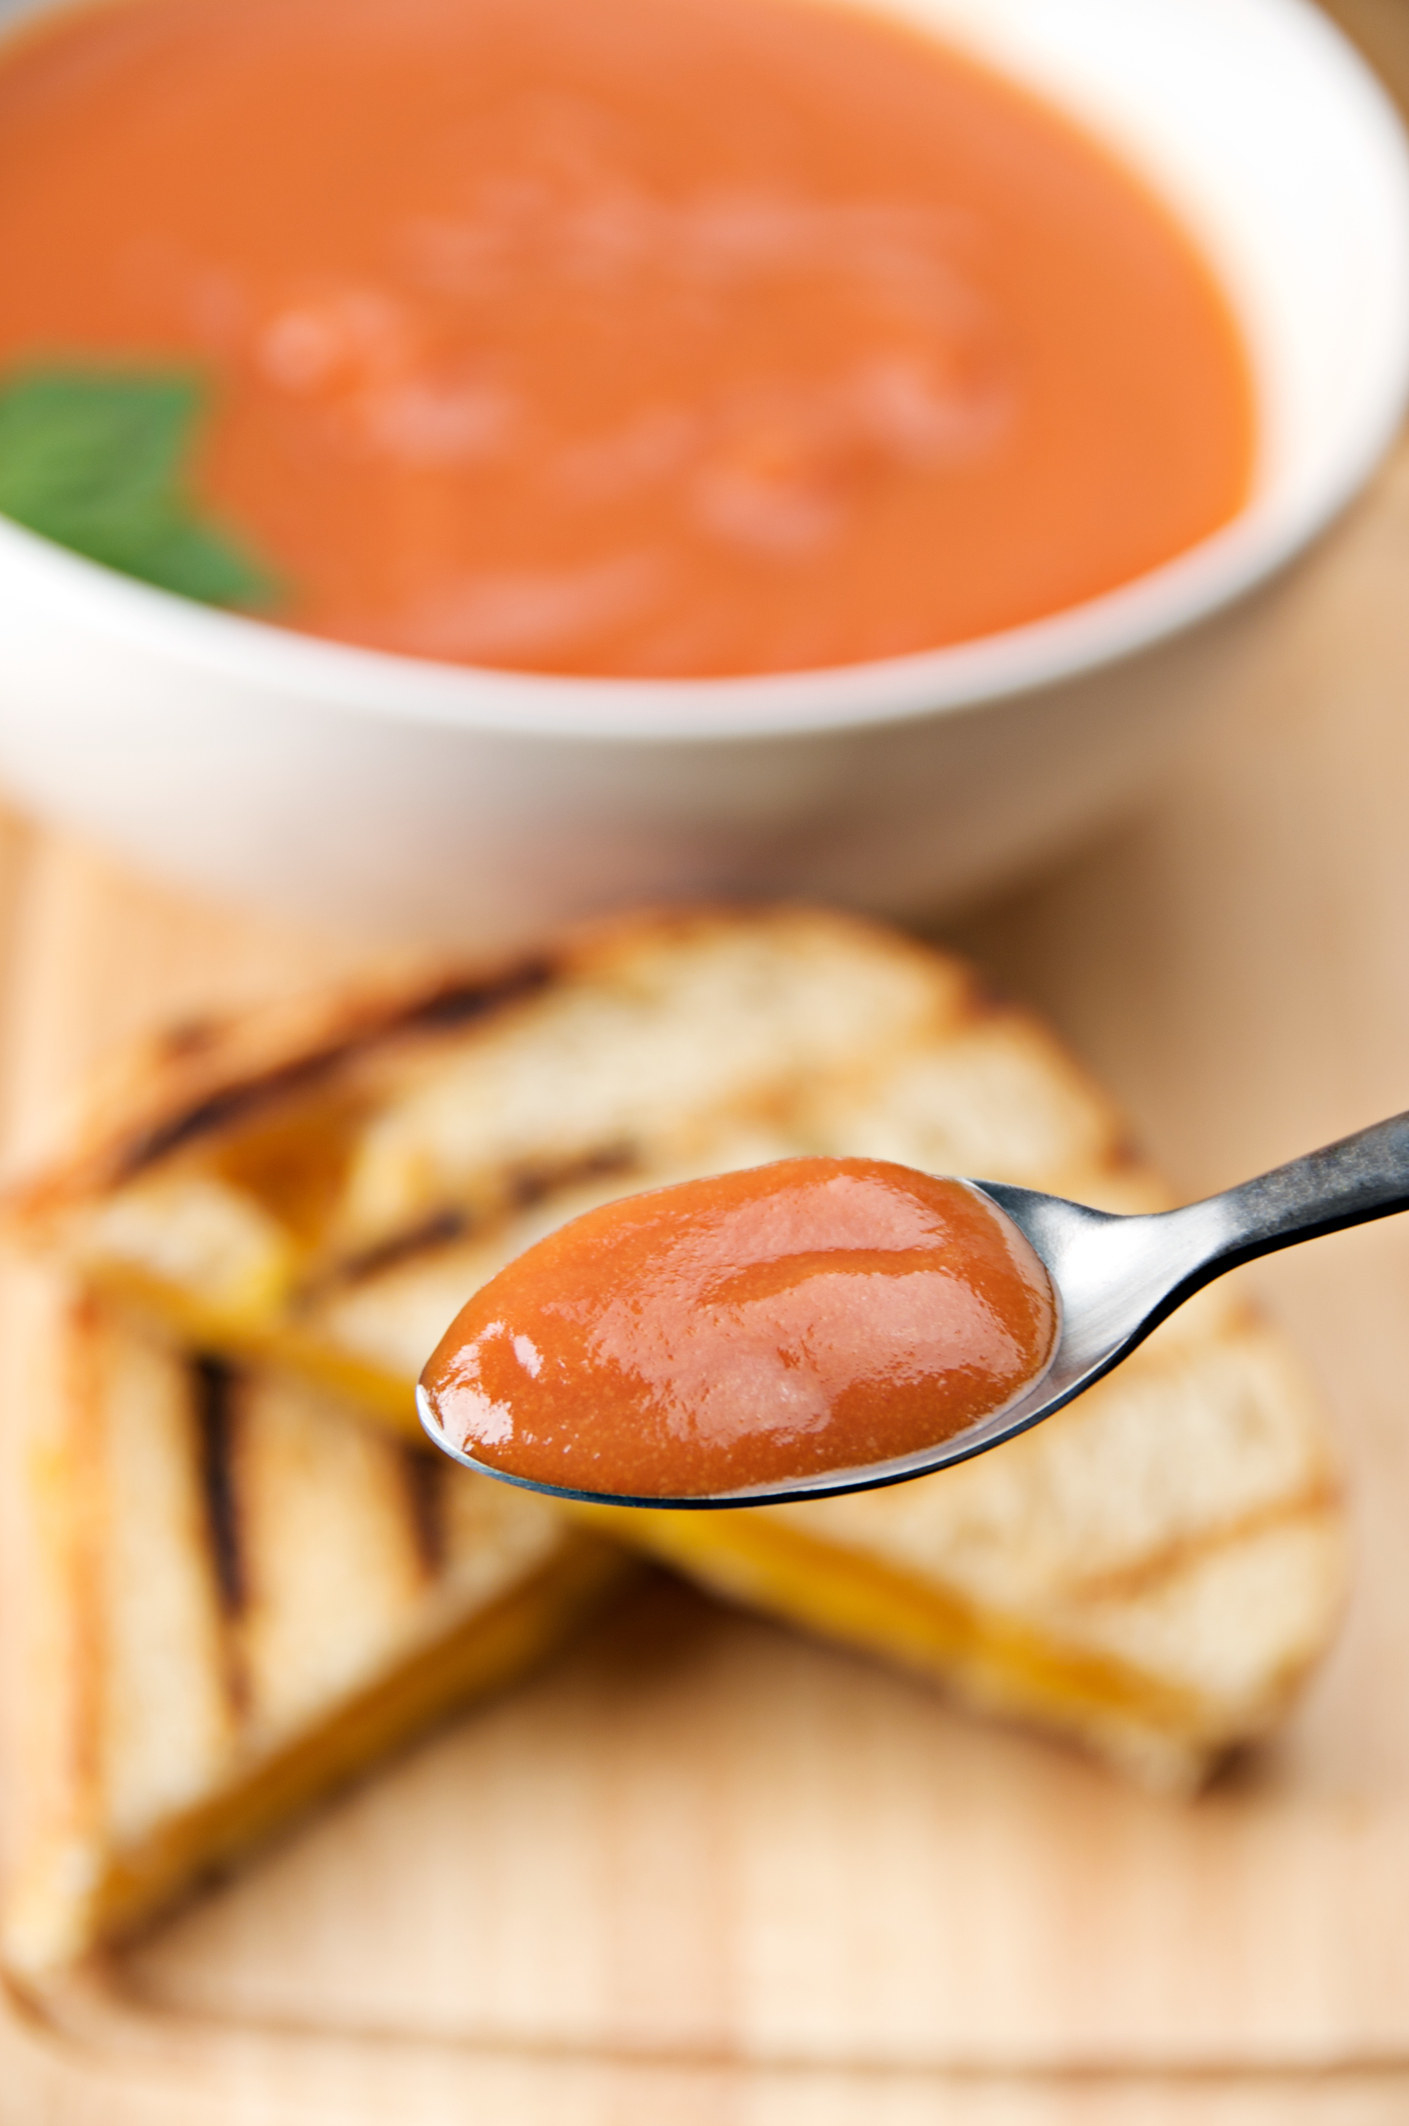 Spoon of tomato soup close-up with grilled cheese and bowl of tomato soup